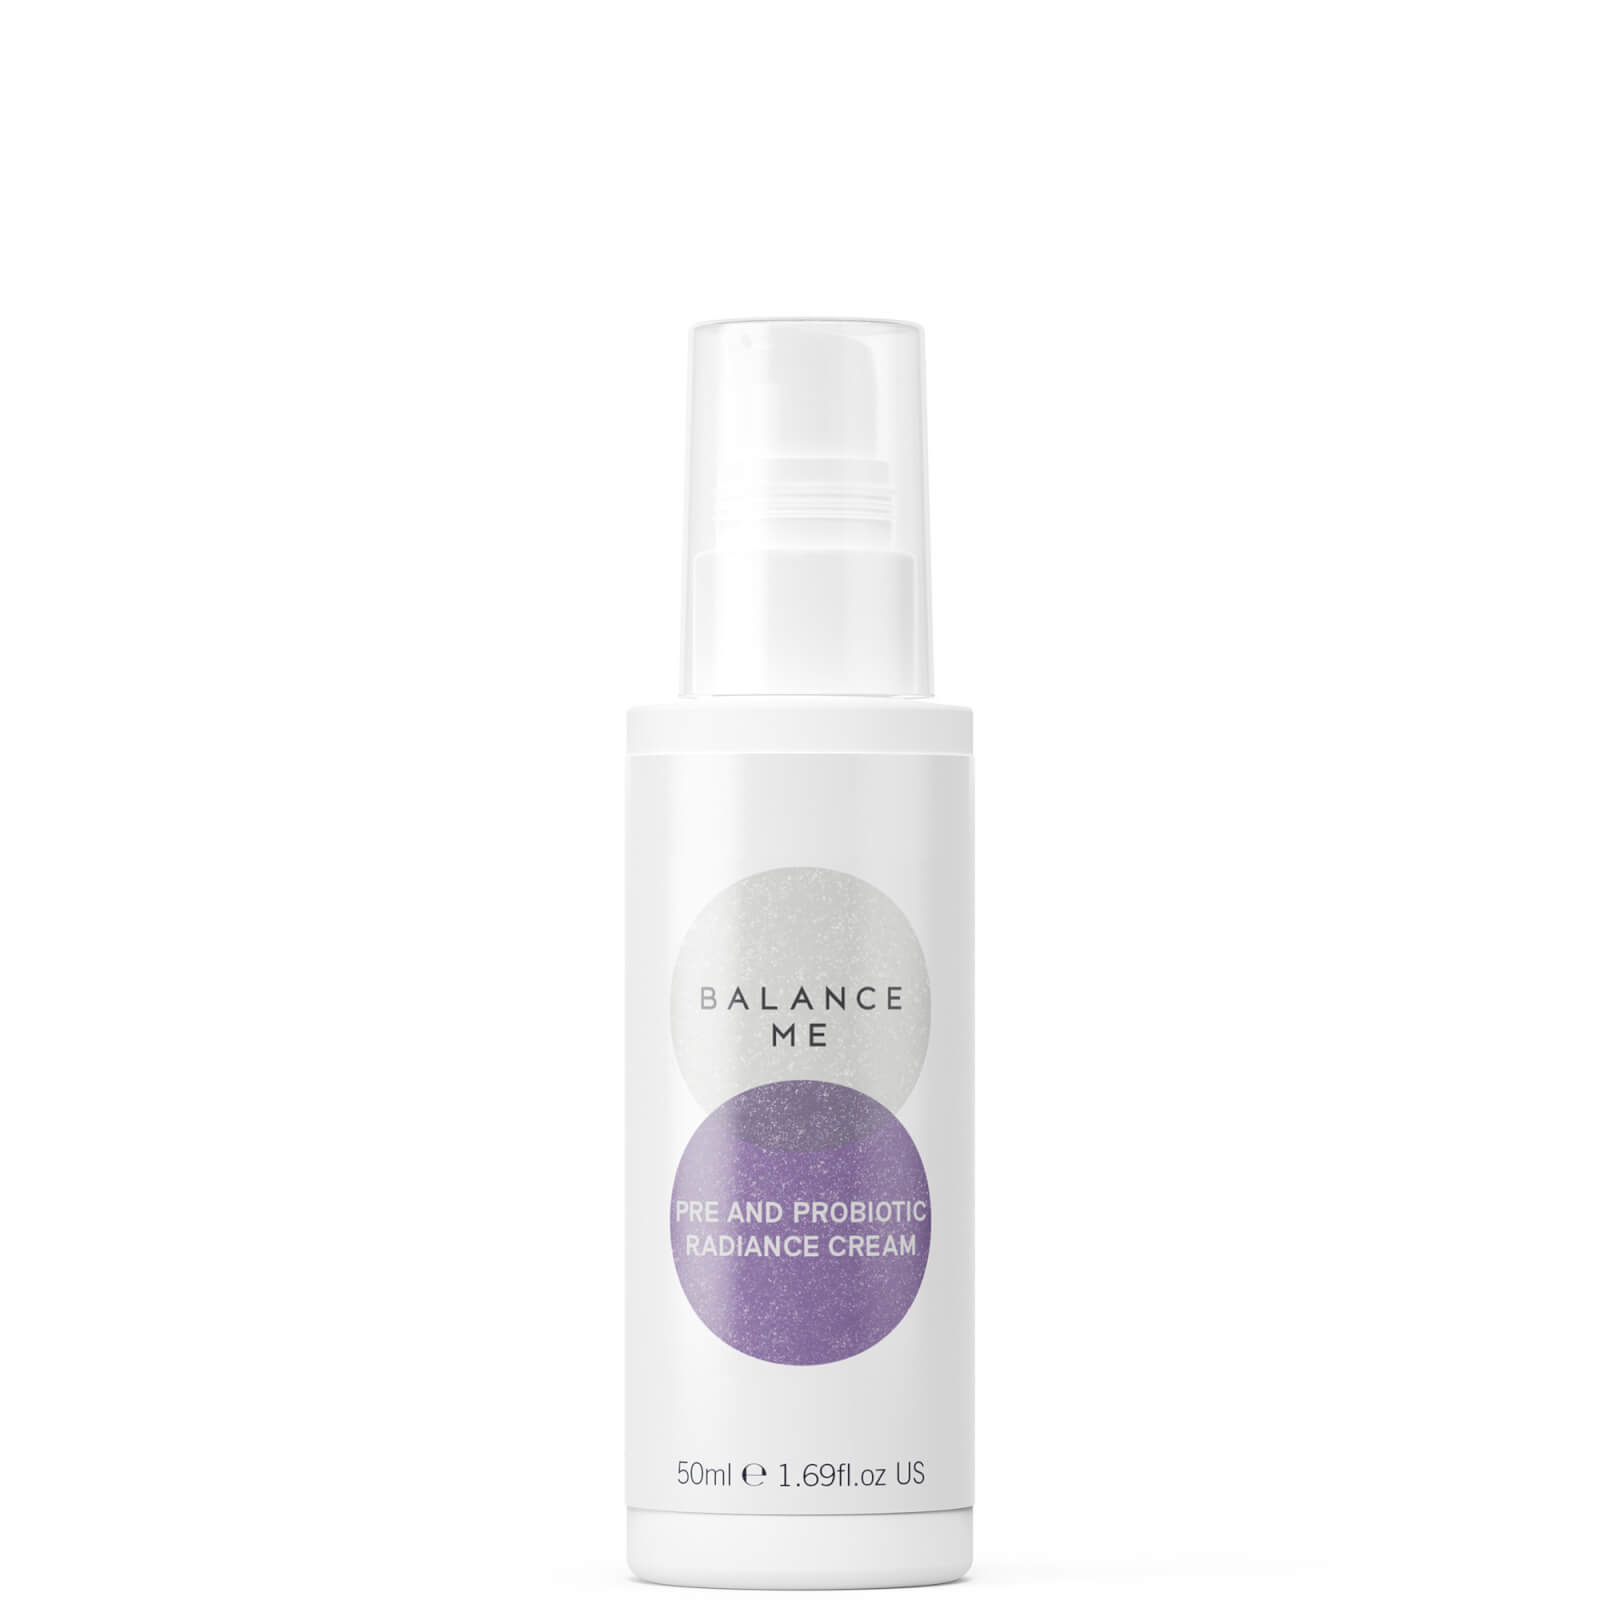 Image of Balance Me Pre and Probiotic Radiance Cream 50ml